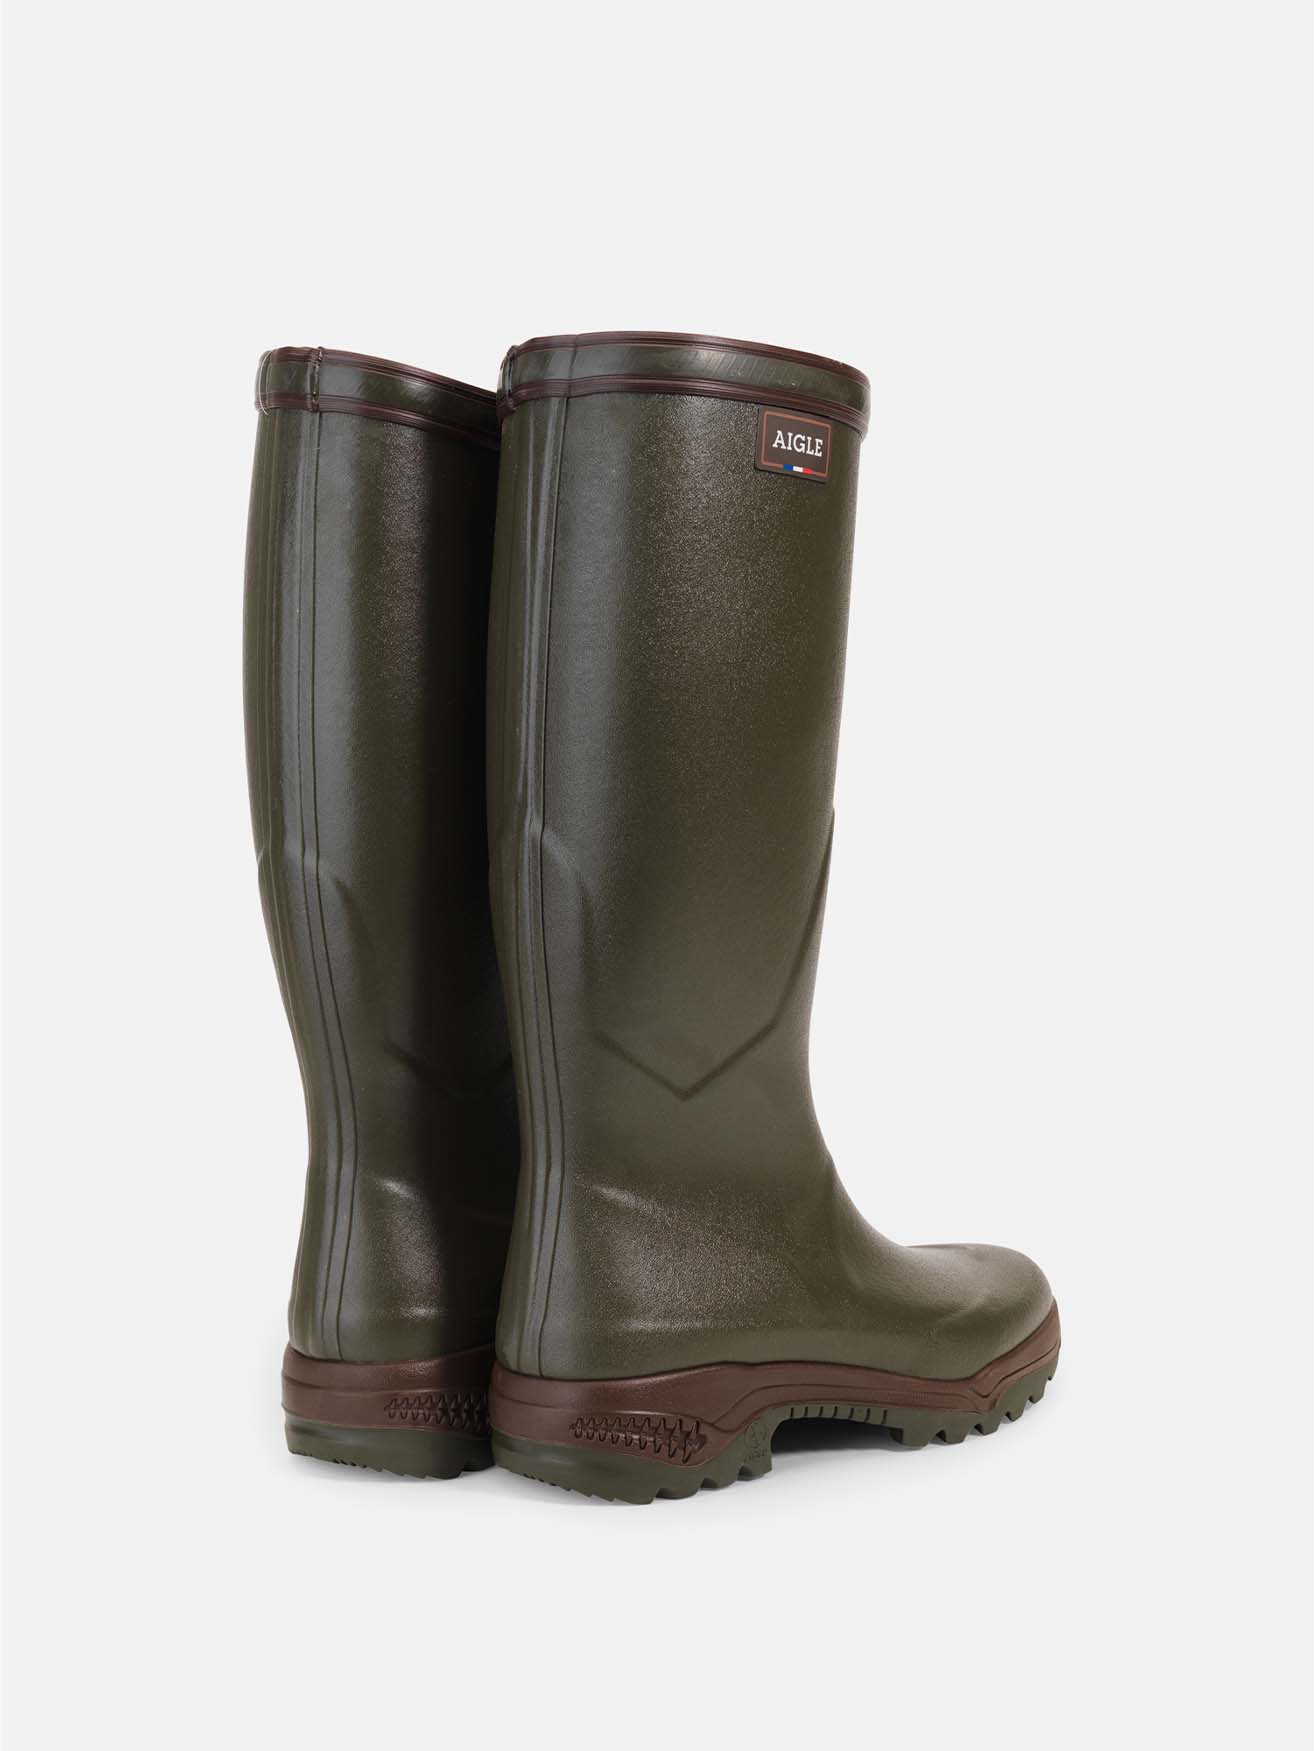 Aigle - Anti-fatigue unisex boots, Made in Parcours® 2 | AIGLE